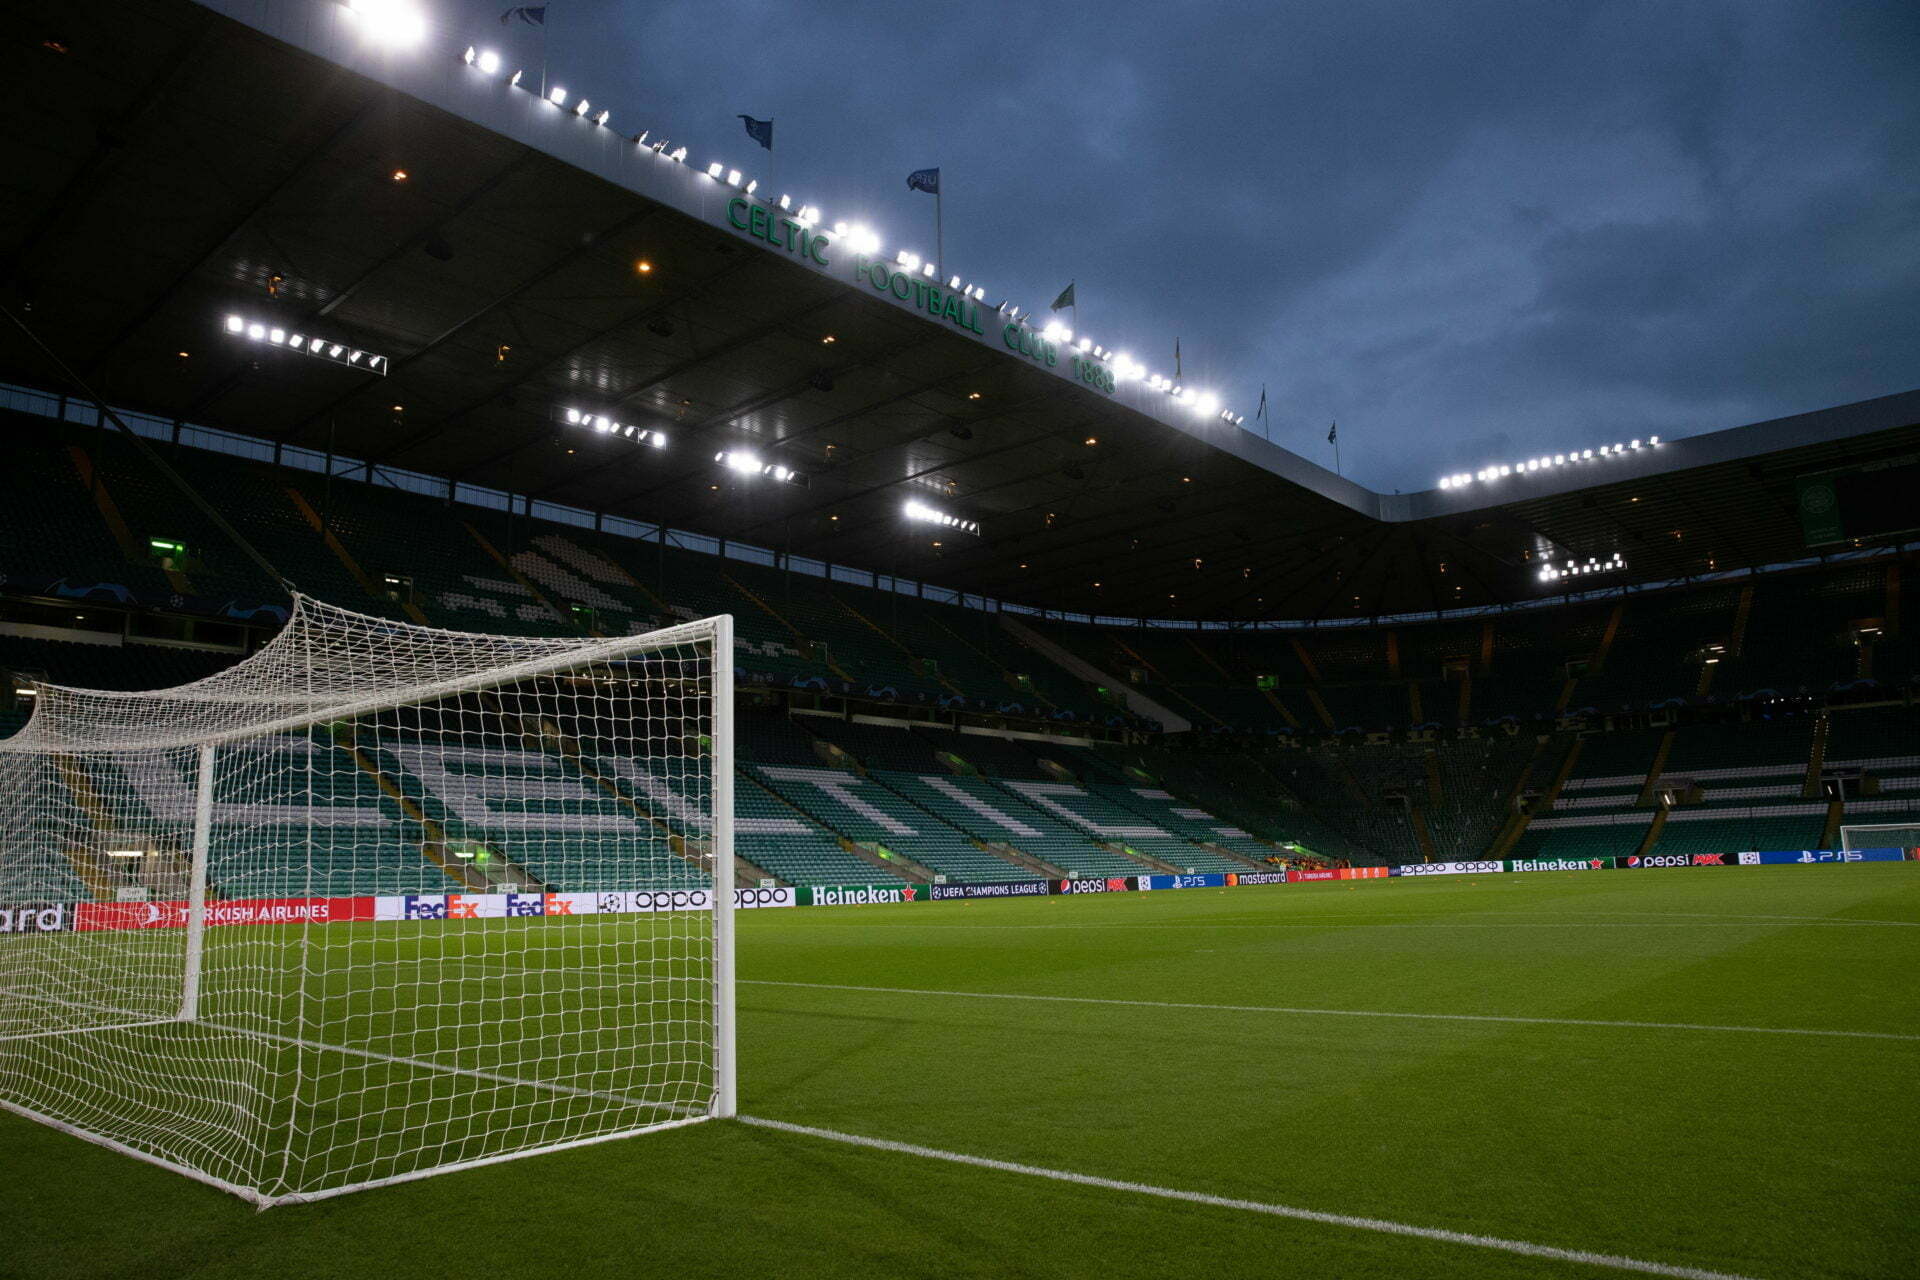 Celtic fans raise £40K for Christmas Appeal with stadium Sleep Out